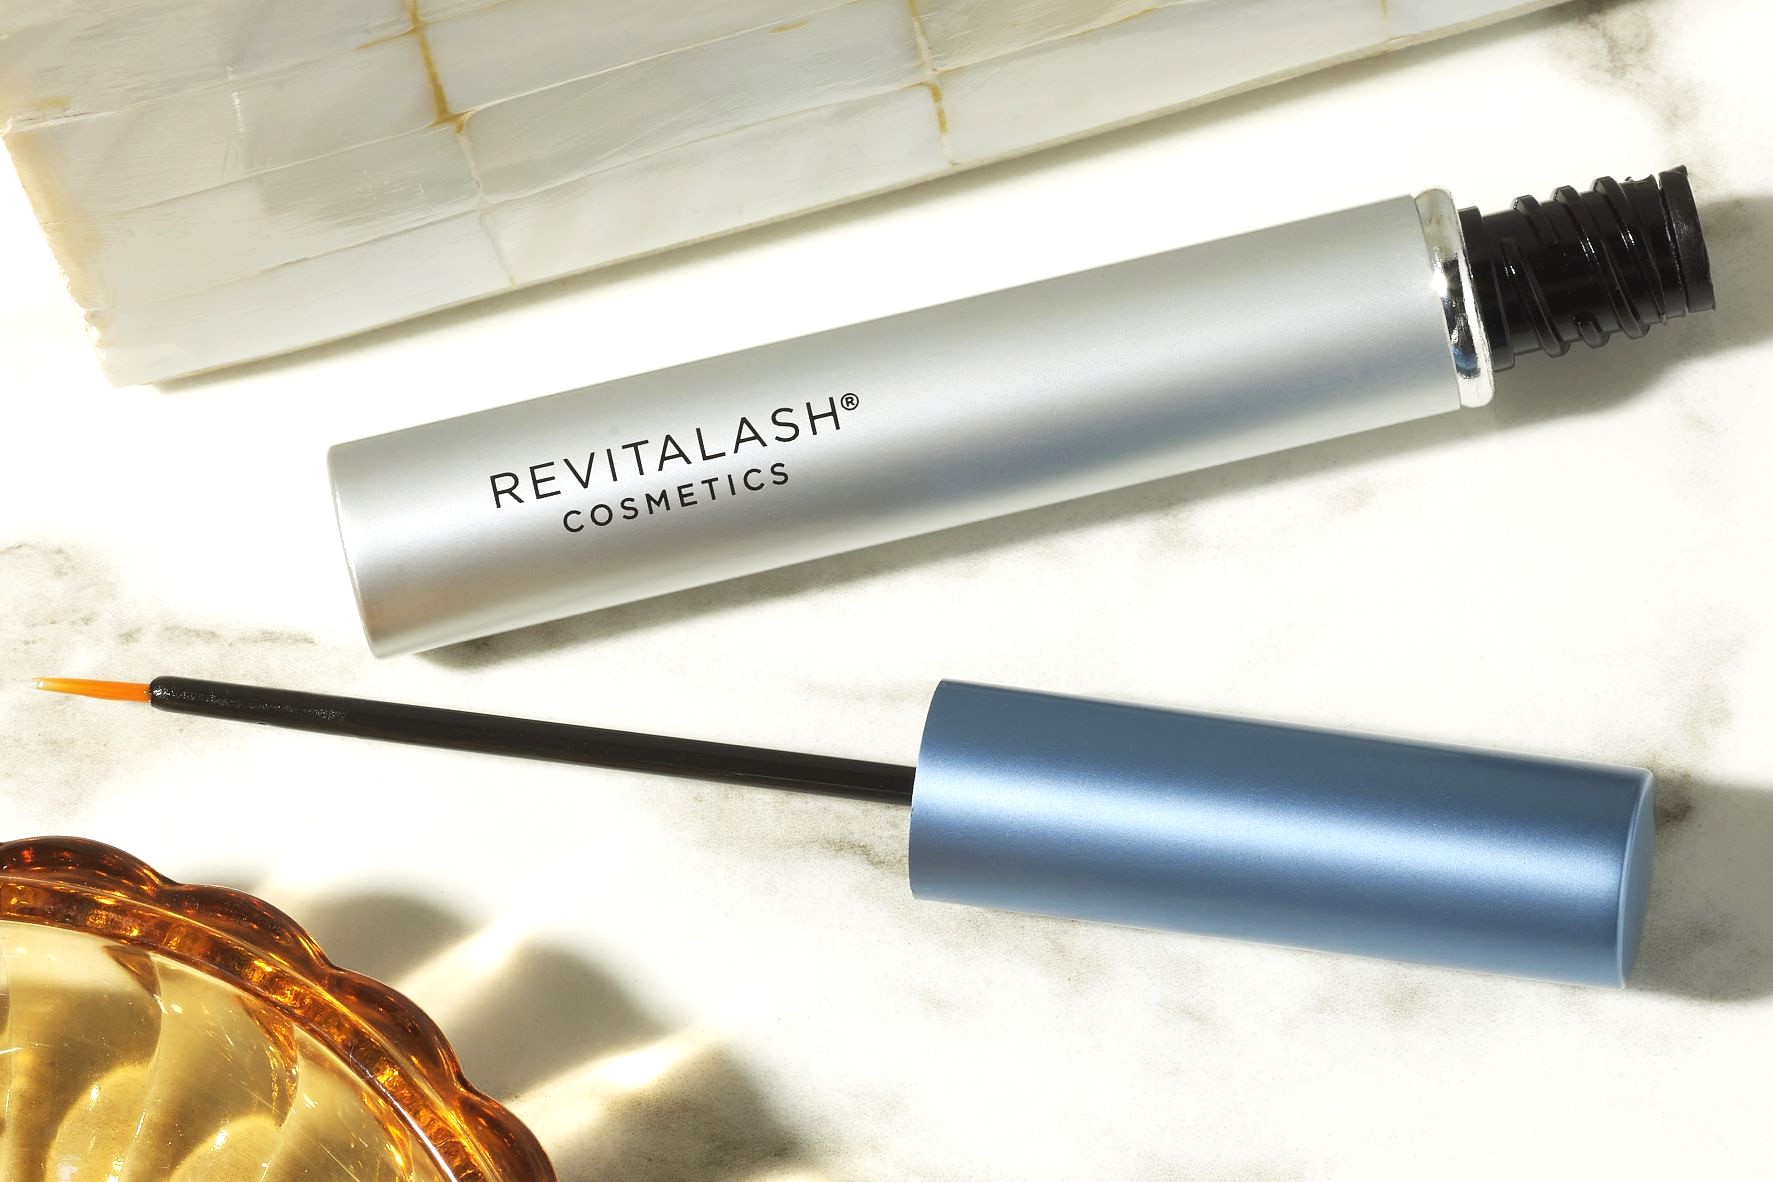 What's All The Fuss About Revitalash?